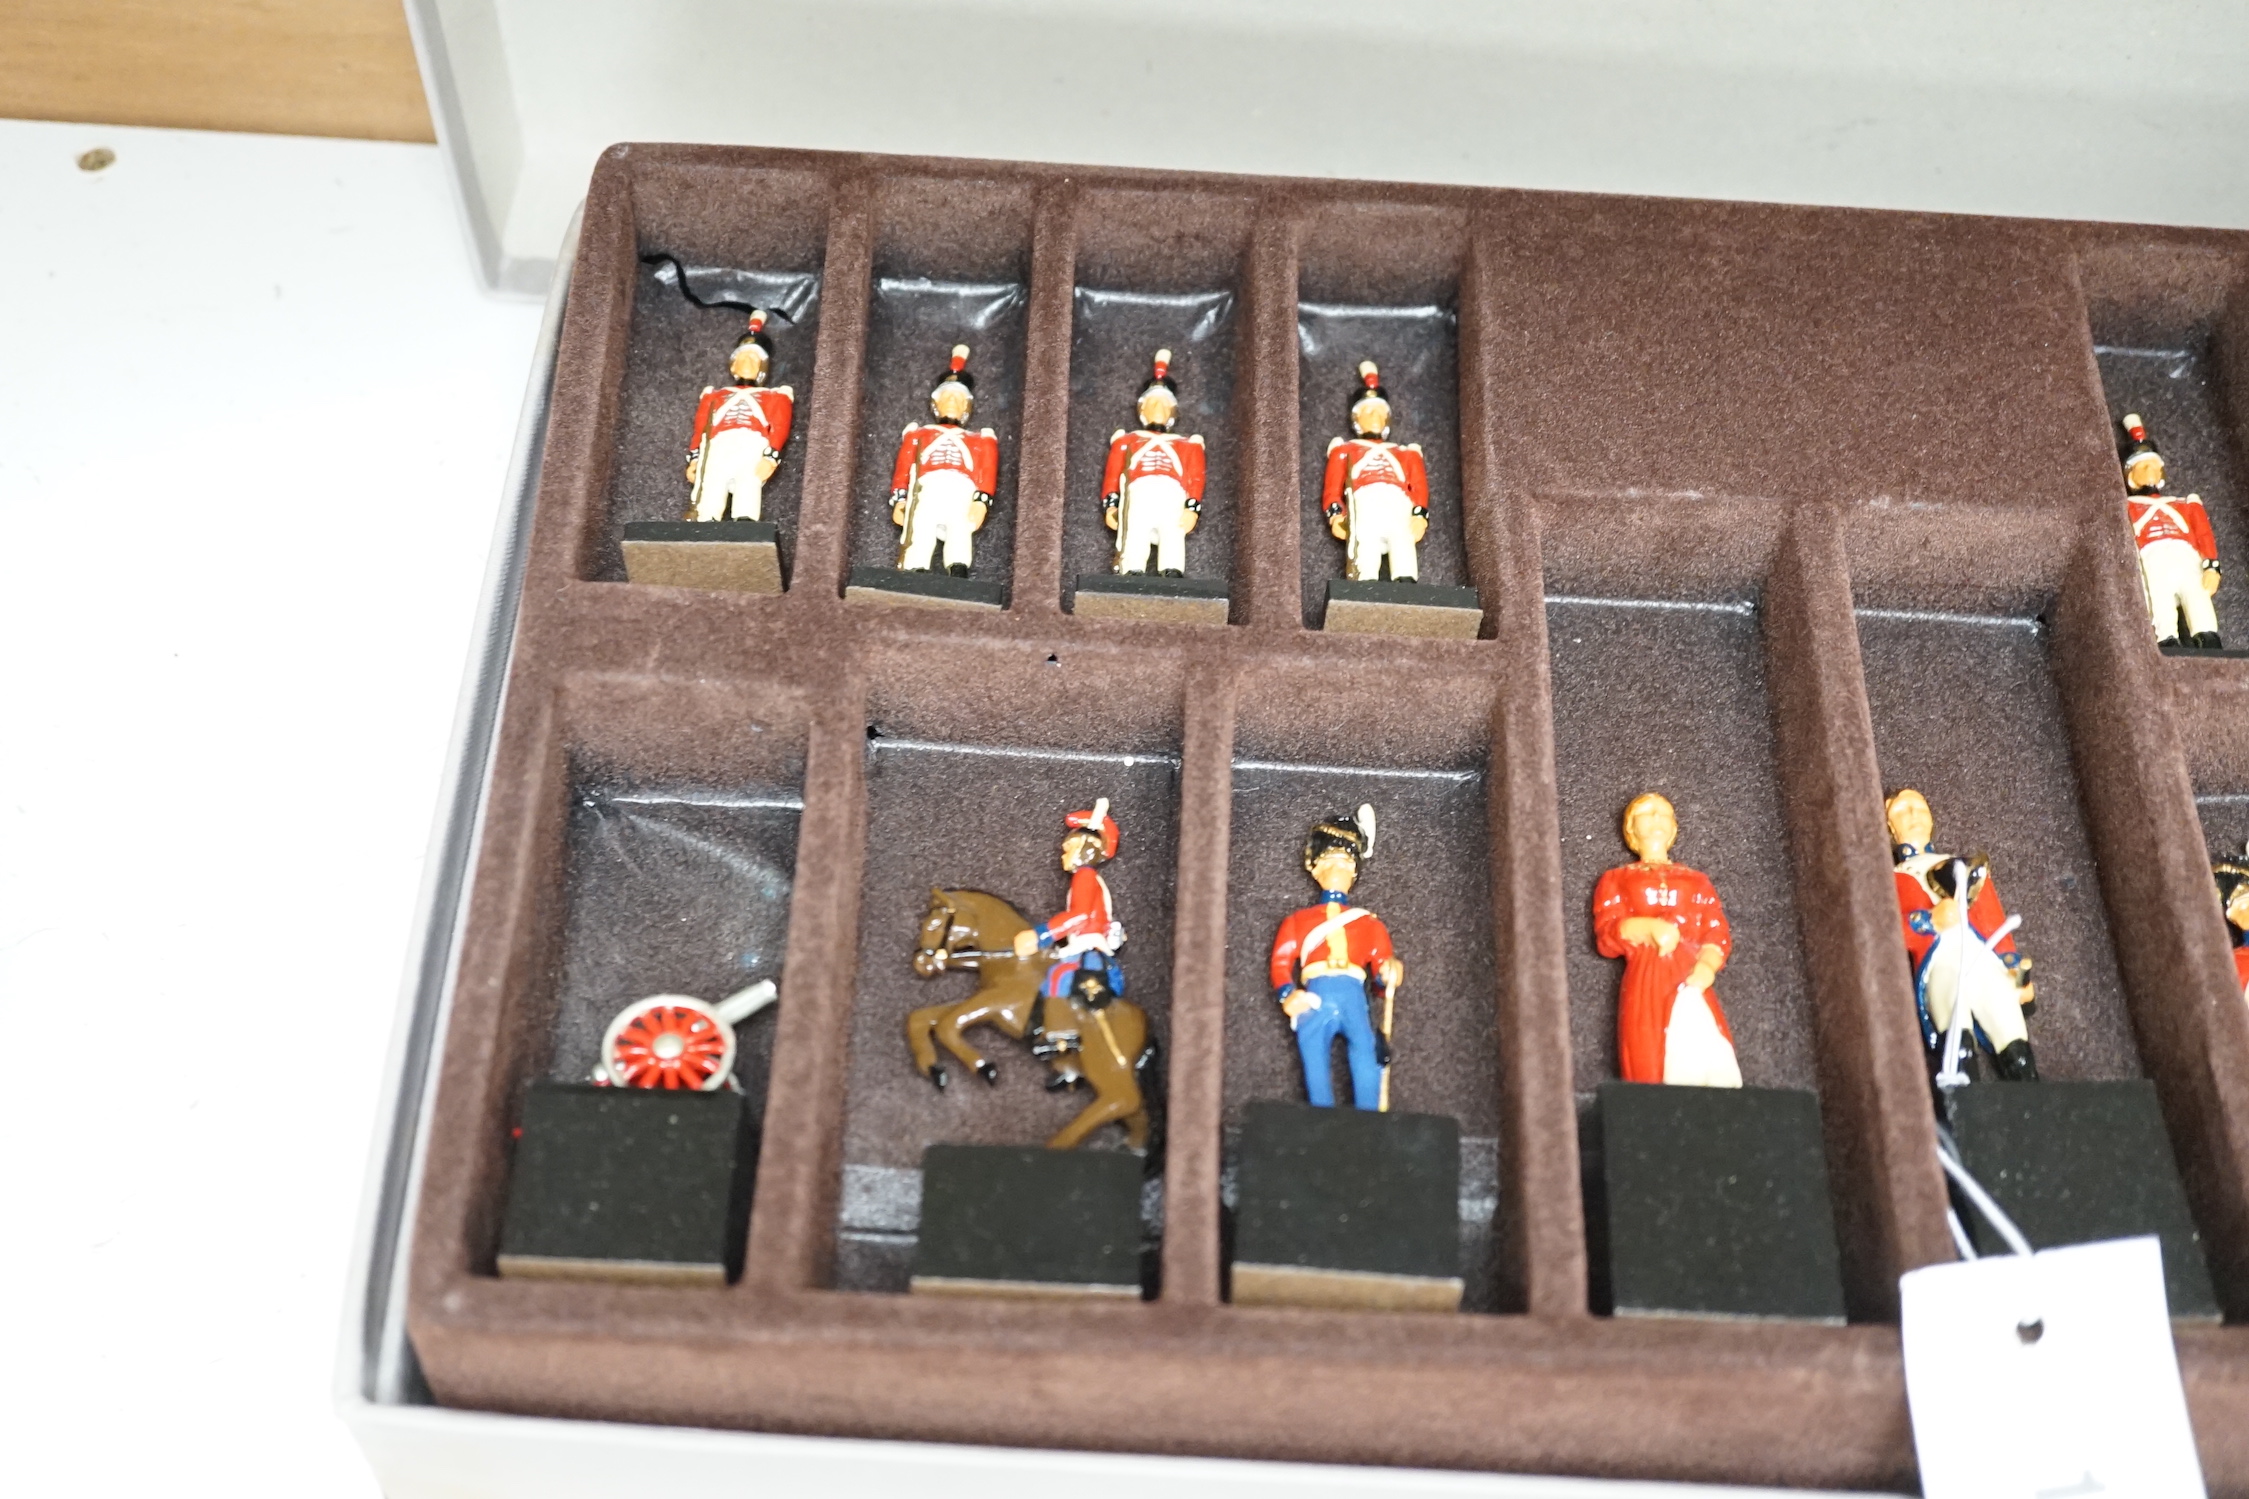 Battle of Waterloo 1815 painted white metal chess pieces by SAC Ltd and various Britains lead soldiers